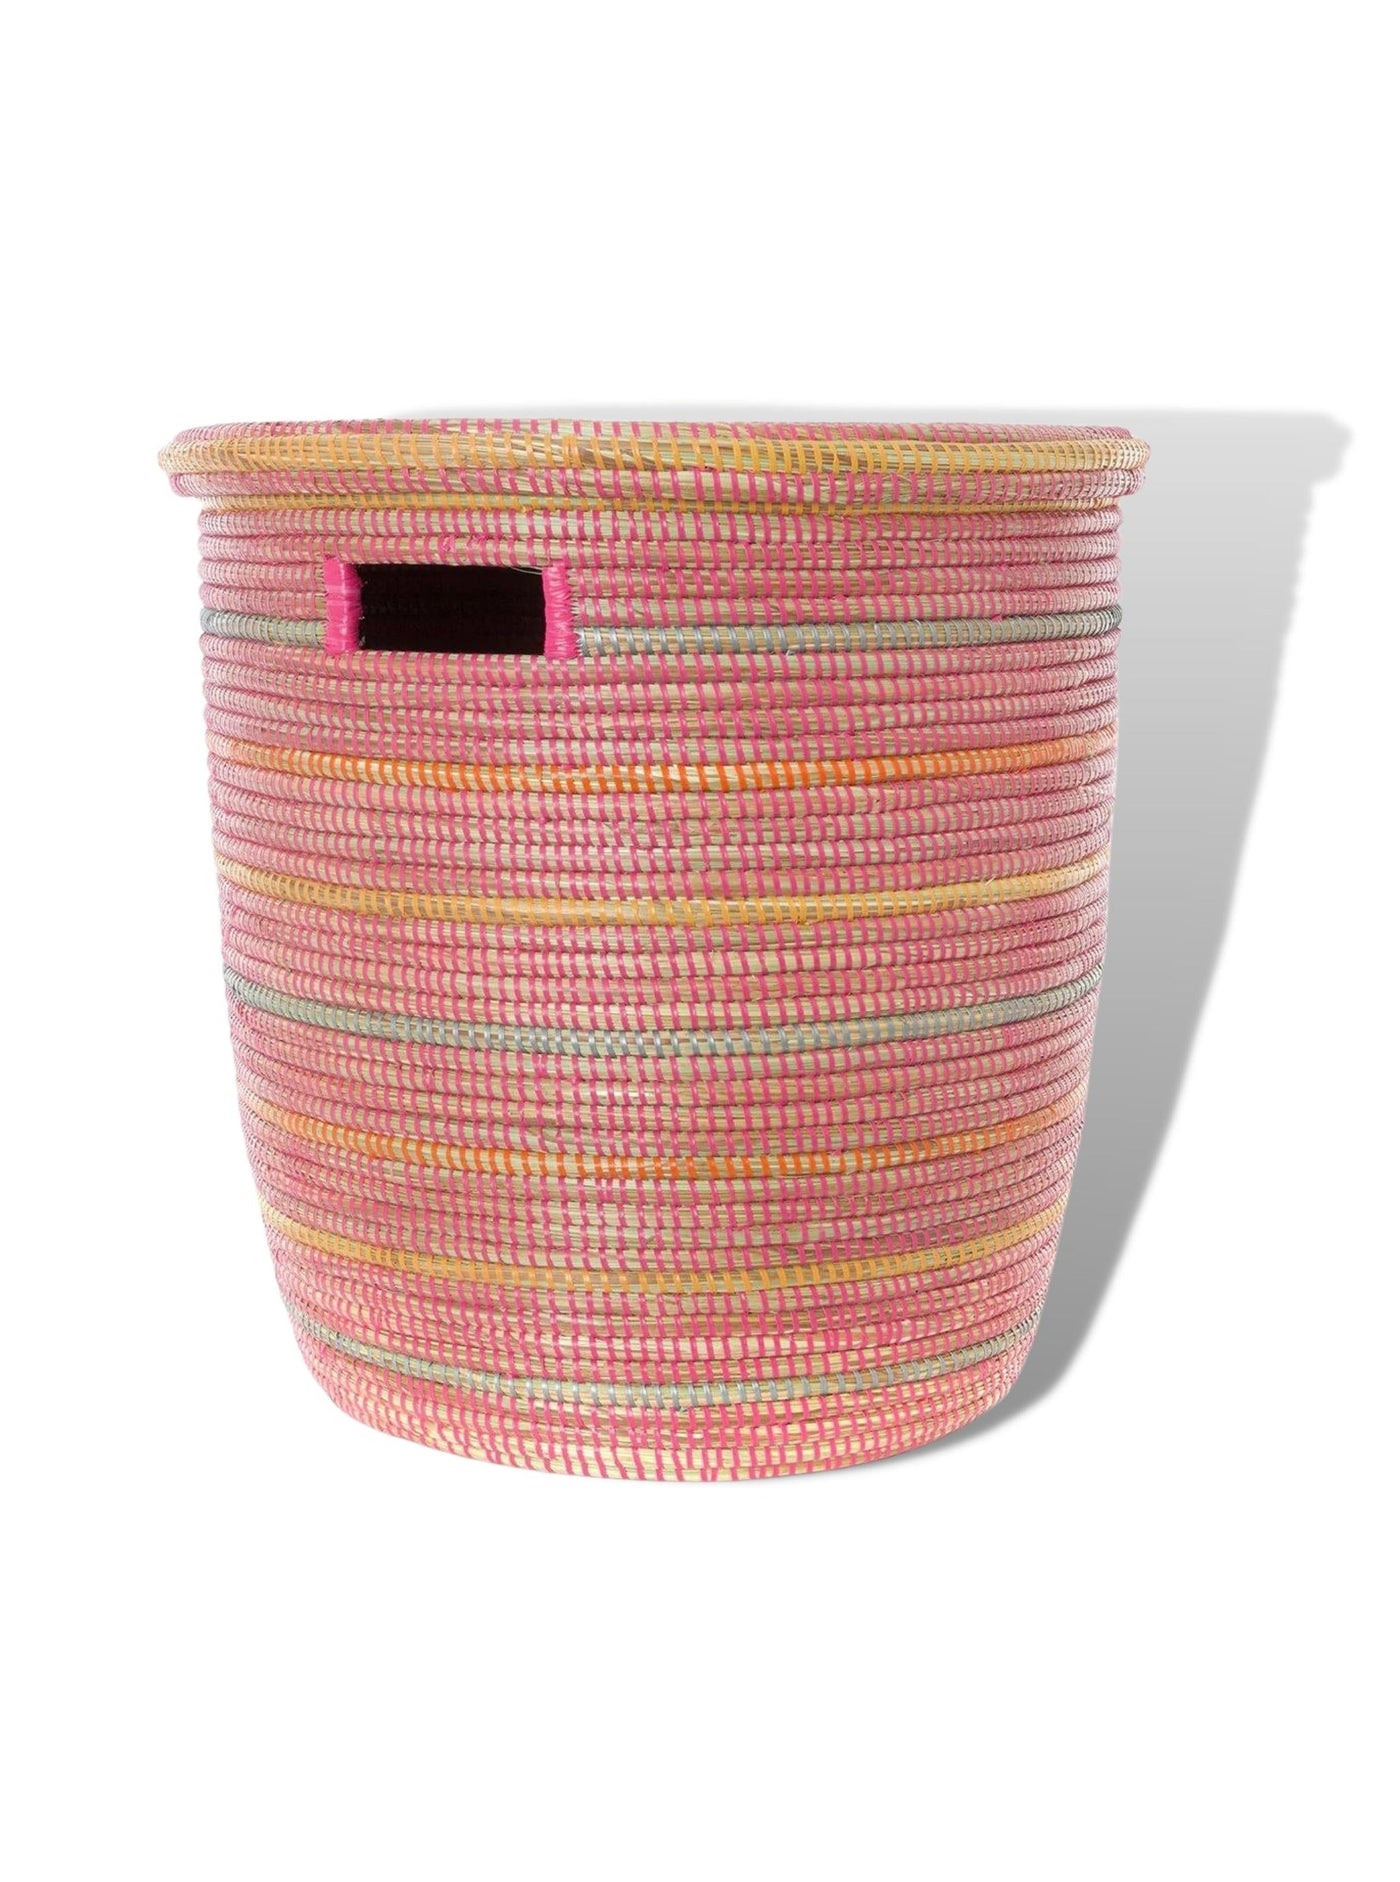 Laundry Basket - Sunrise Strips  (Pick up or local delivery only)